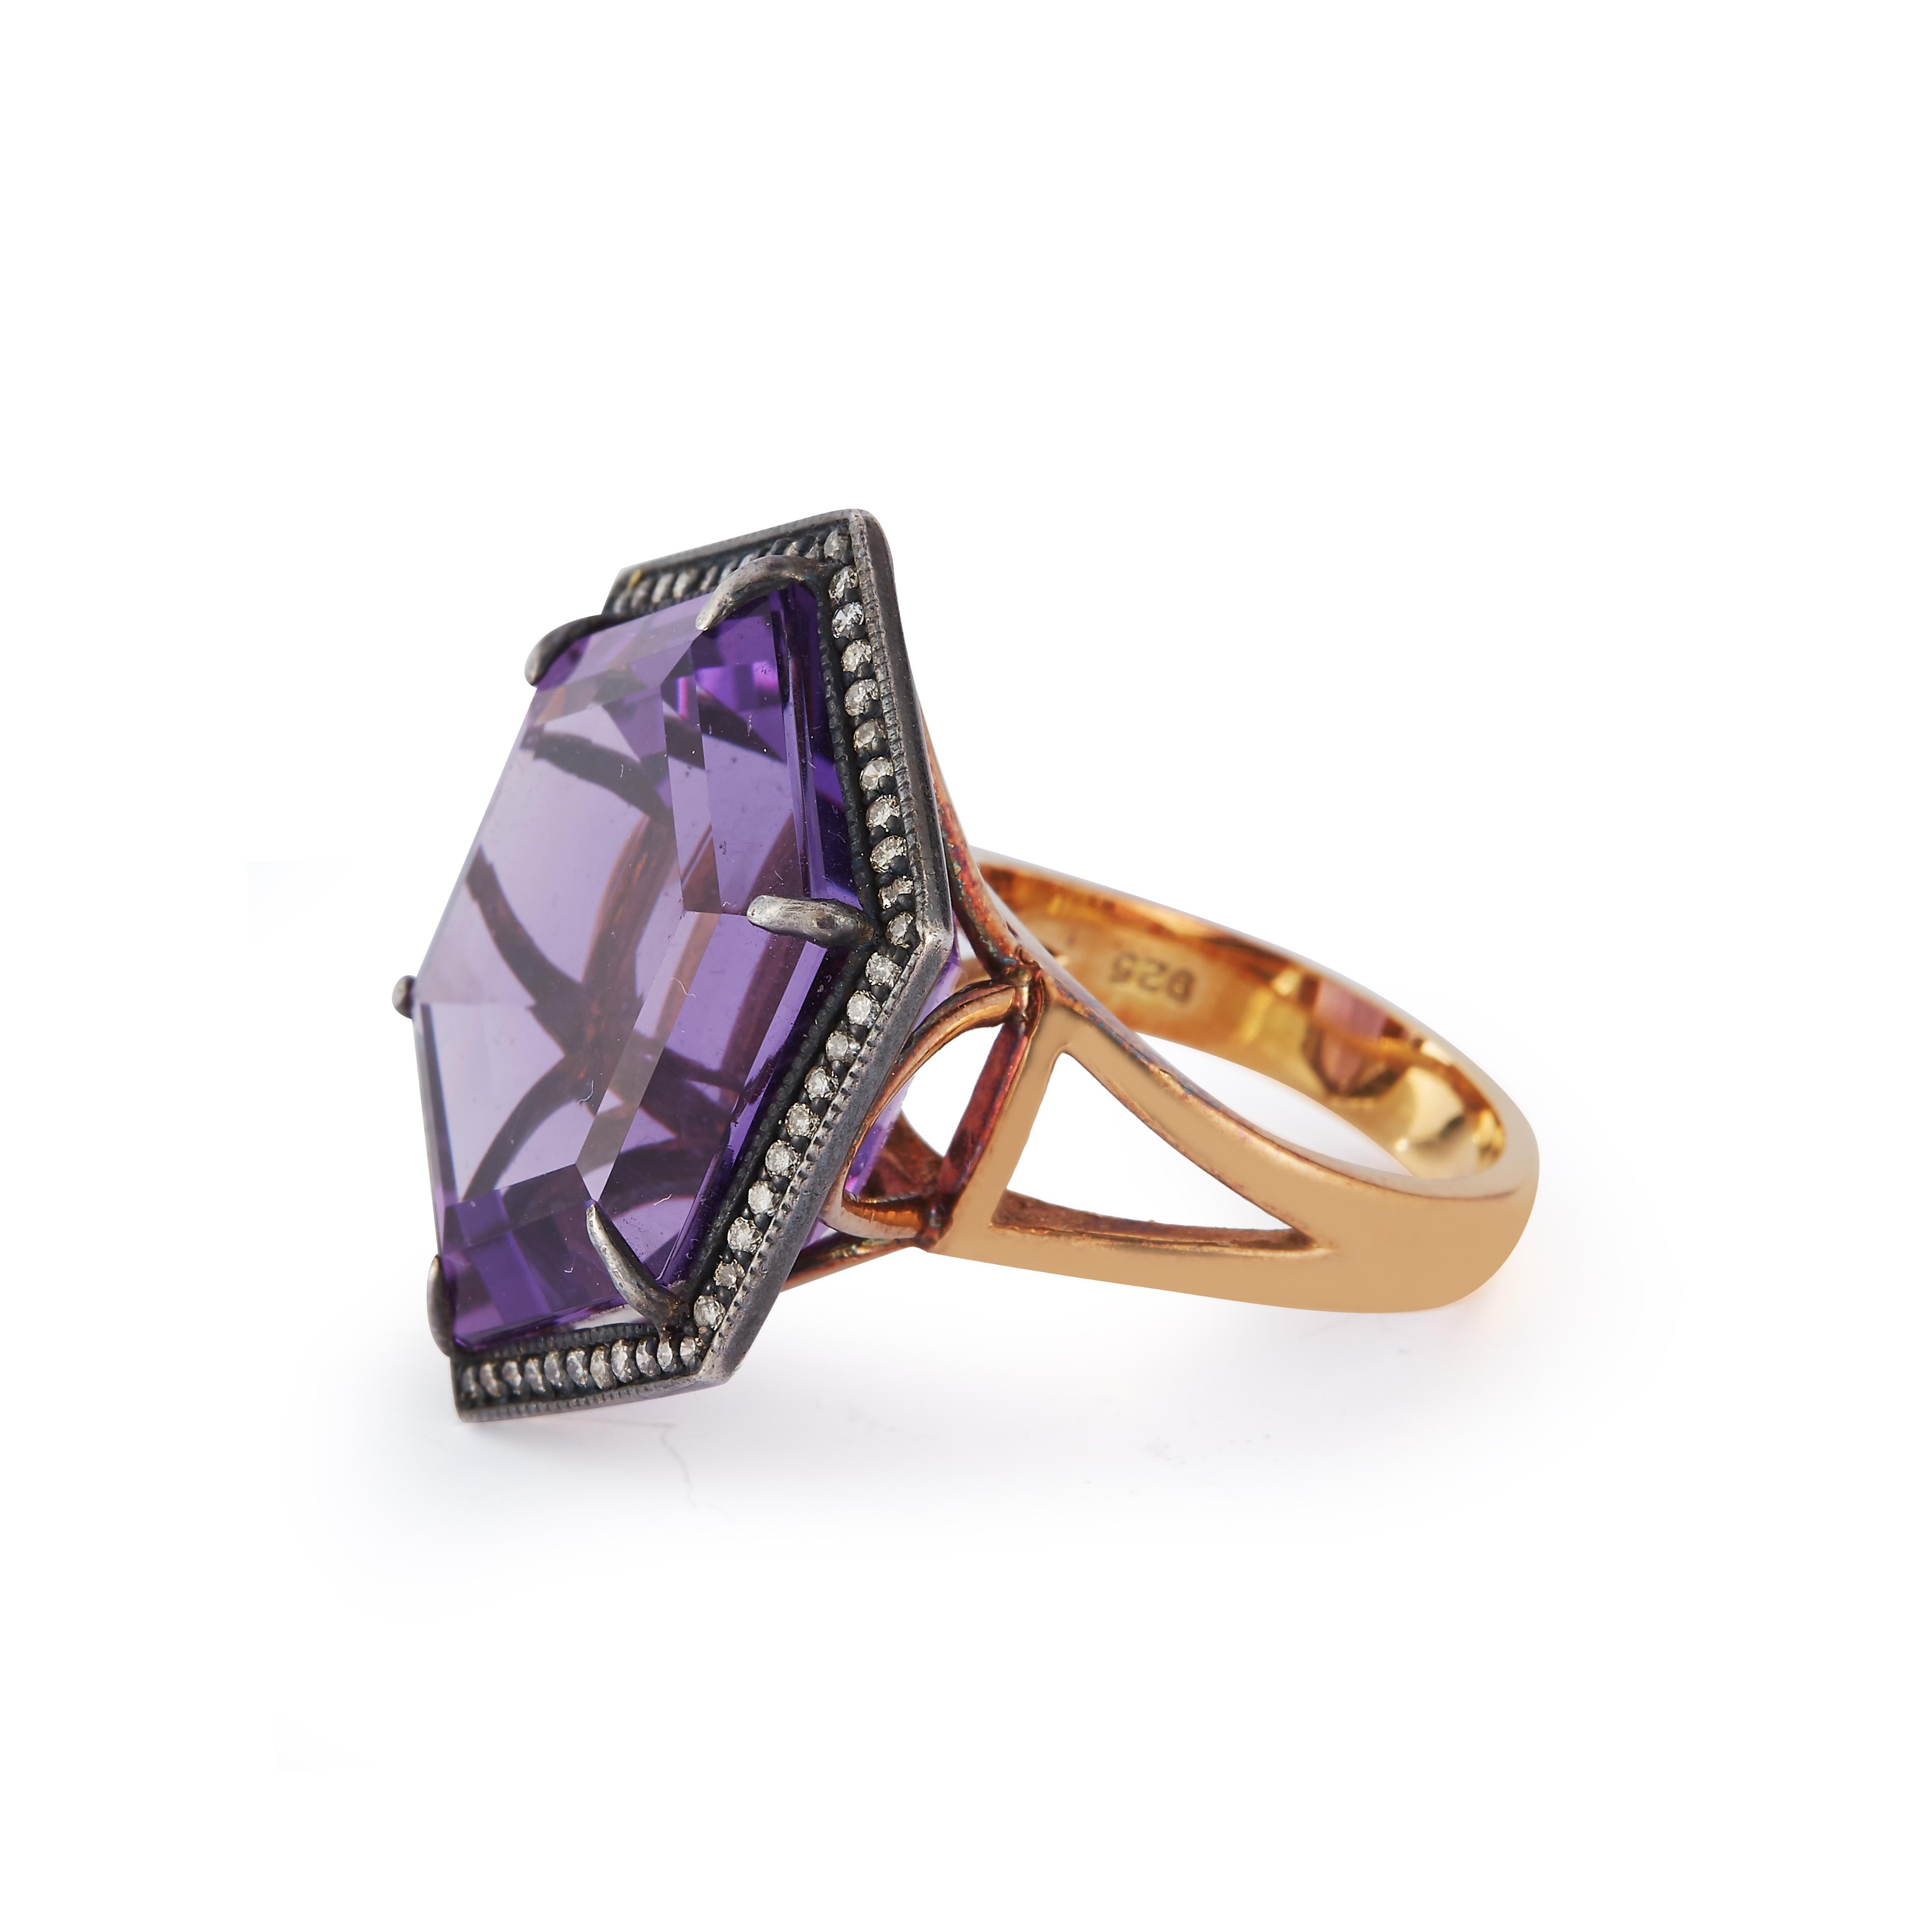 Parulina Couture Fine Jewelry -  From the Sovereign Collection this ring features a 32.15ct Amethyst surrounded by 0.45ct of sparkling Diamonds. Set in 18K Yellow Gold.
Size 6

Metal: 18K Yellow Gold
Gemstone Carat Weight: 32.15ct Amethyst
Diamond